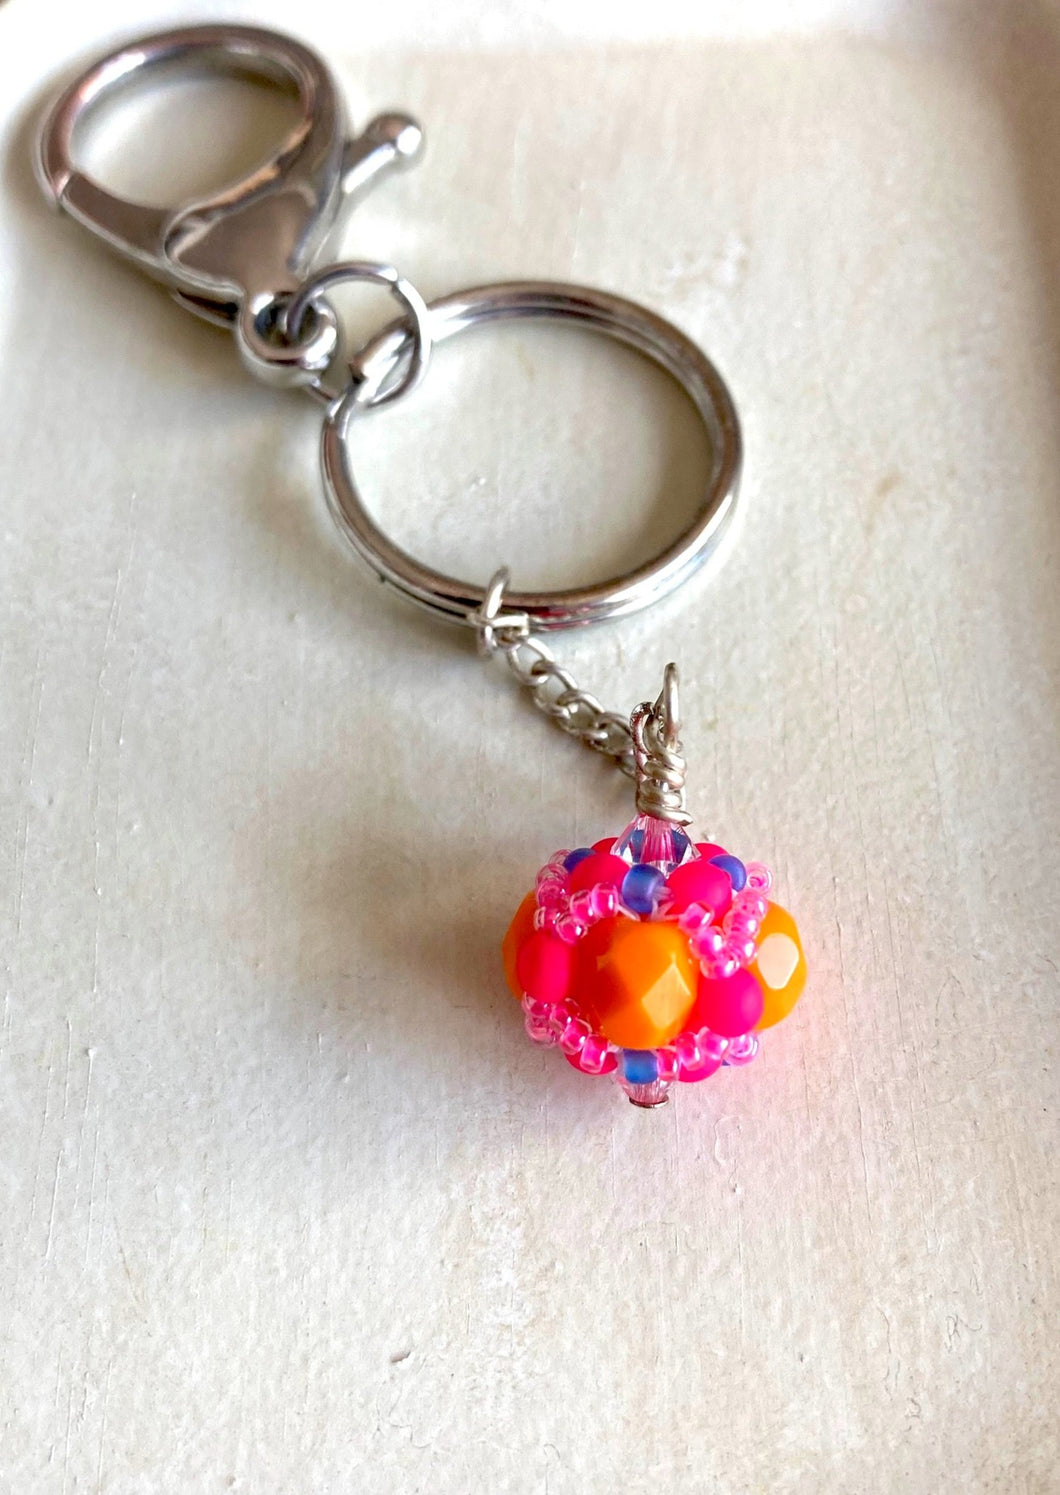 Rhode Island School of Design Gifts -- Handcrafted Crystal & Glass Proud of U.™  Key Chain